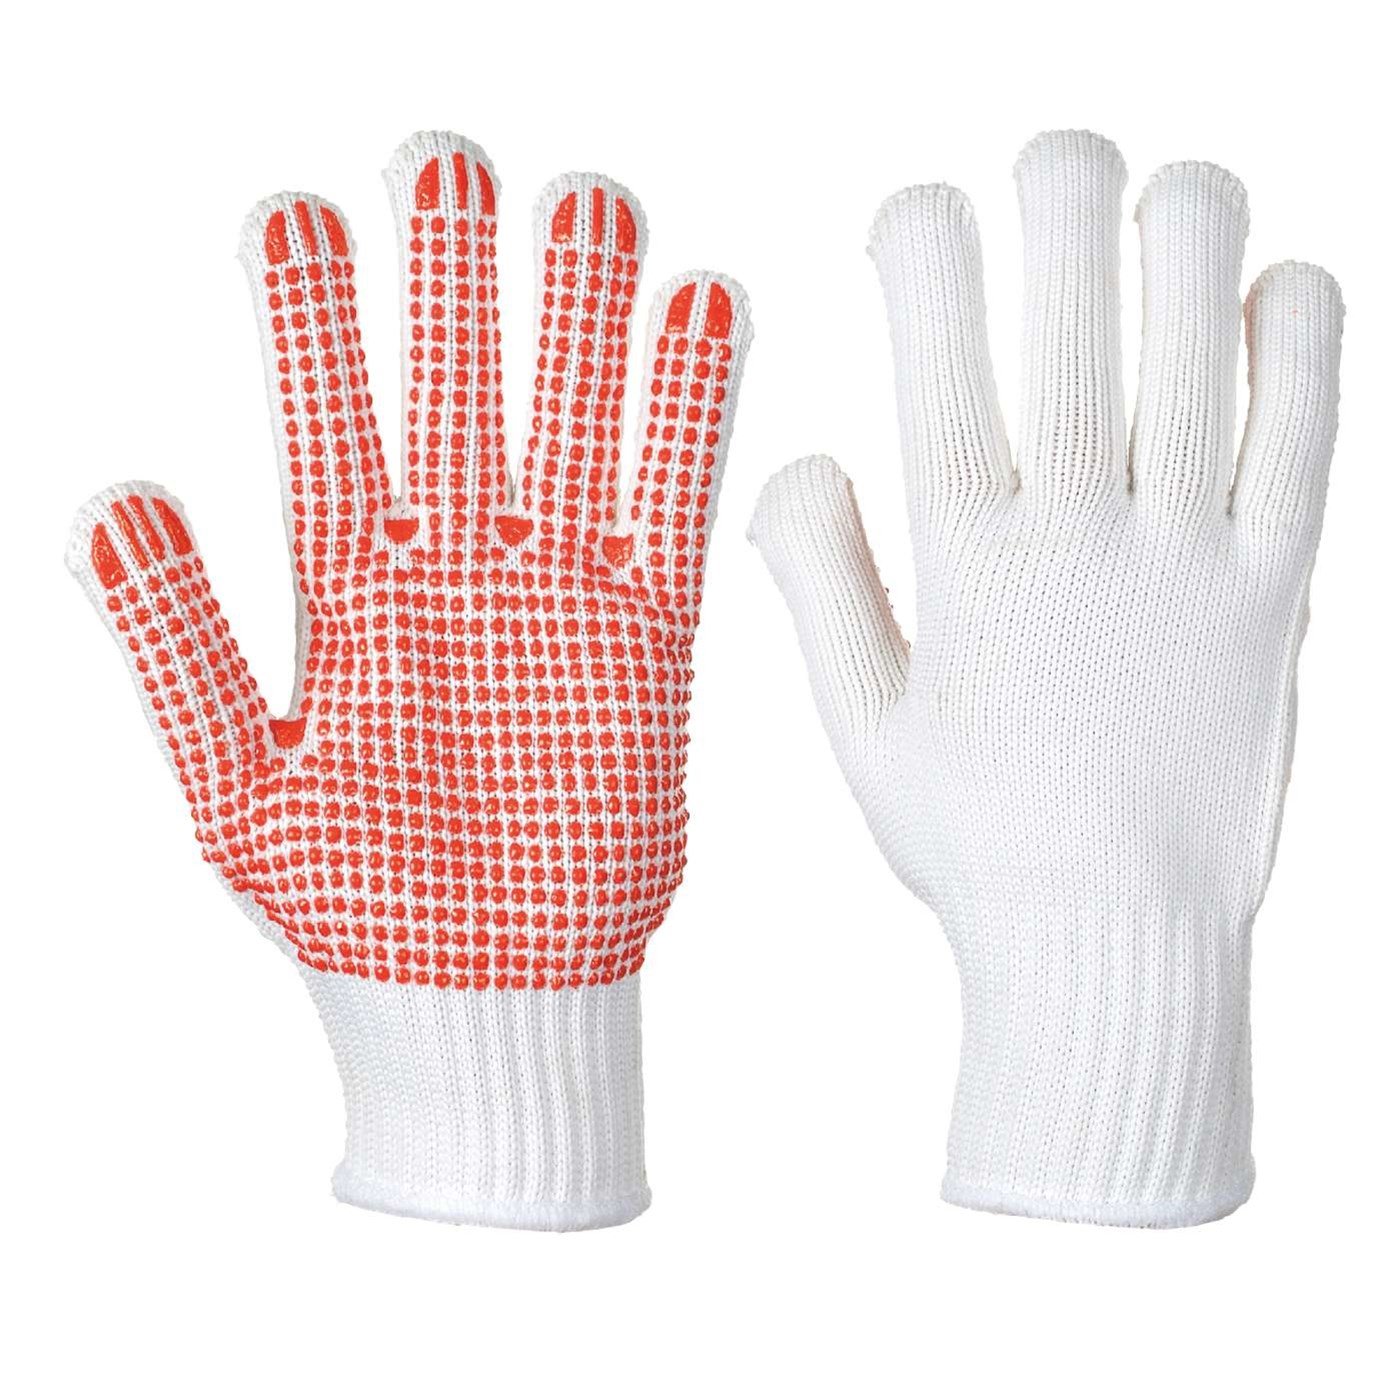 12 Pairs Portwest A112 Heavyweight Polka Dot Safety Glove PVC Red White